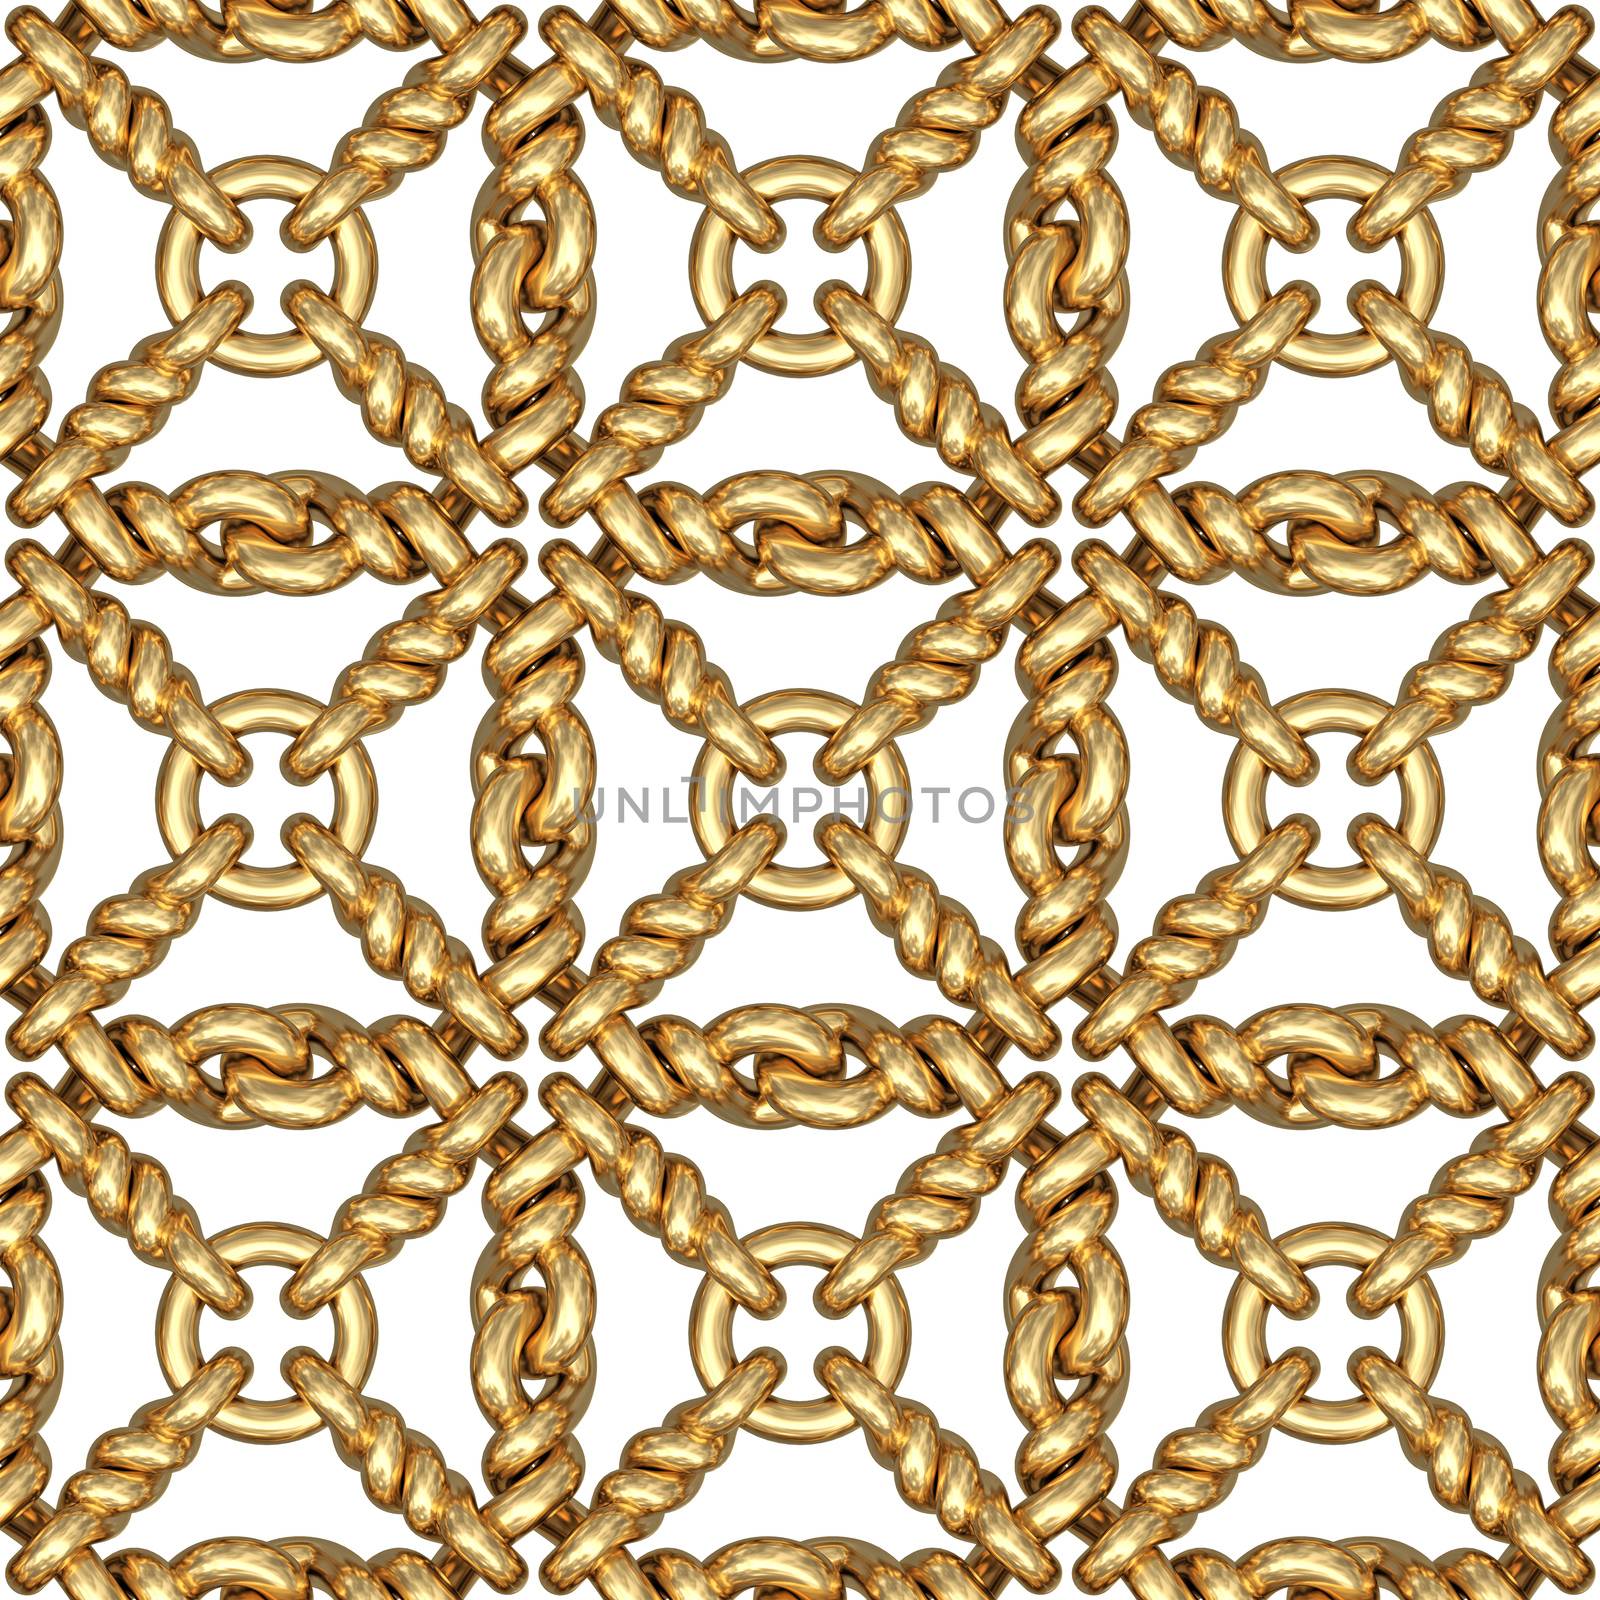 Seamless pattern of gold wire mesh or fence on white by oneo